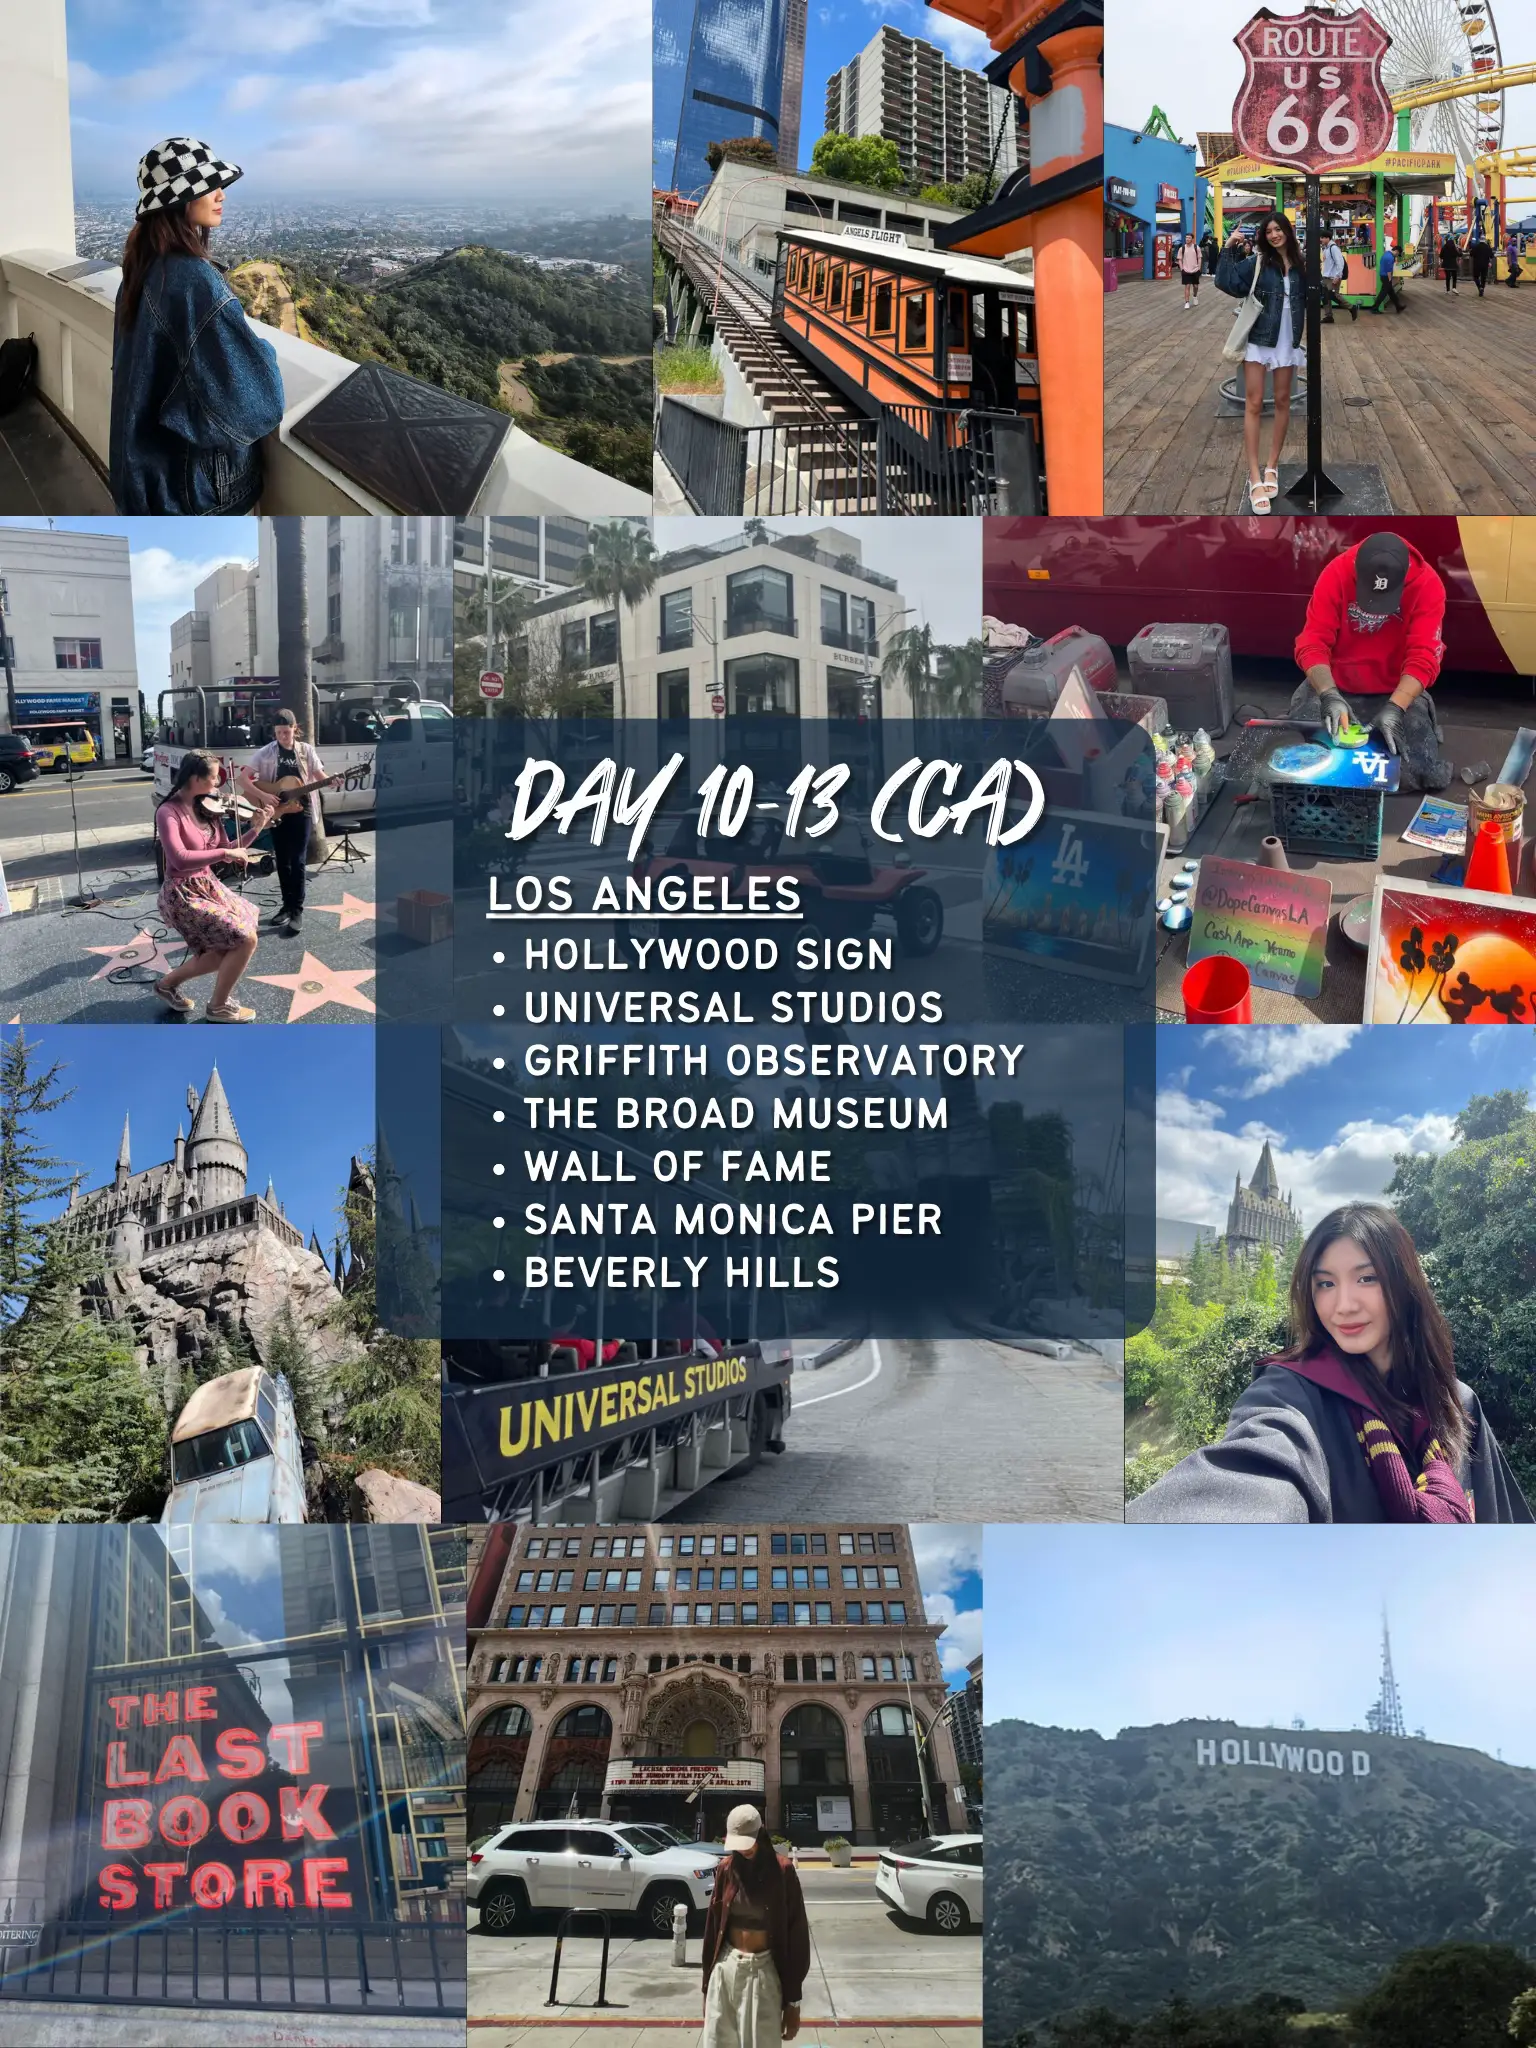 11 Cities, 3 States In 18 Days | 🇺🇸 FULL Itinerary 's images(5)